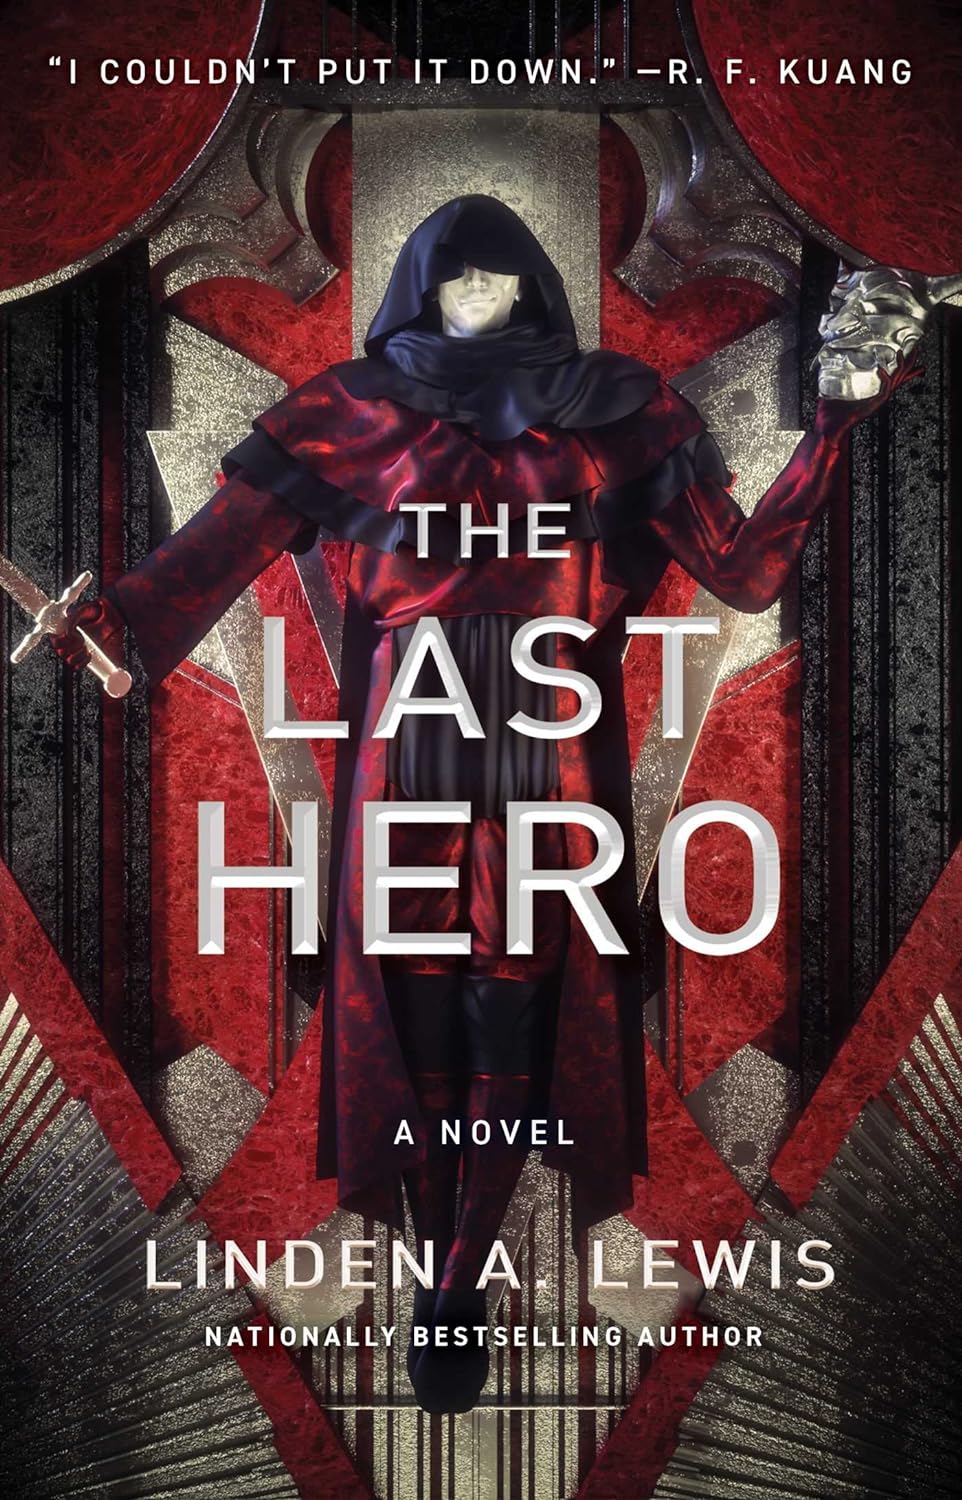 The Last Hero (3) (The First Sister trilogy)